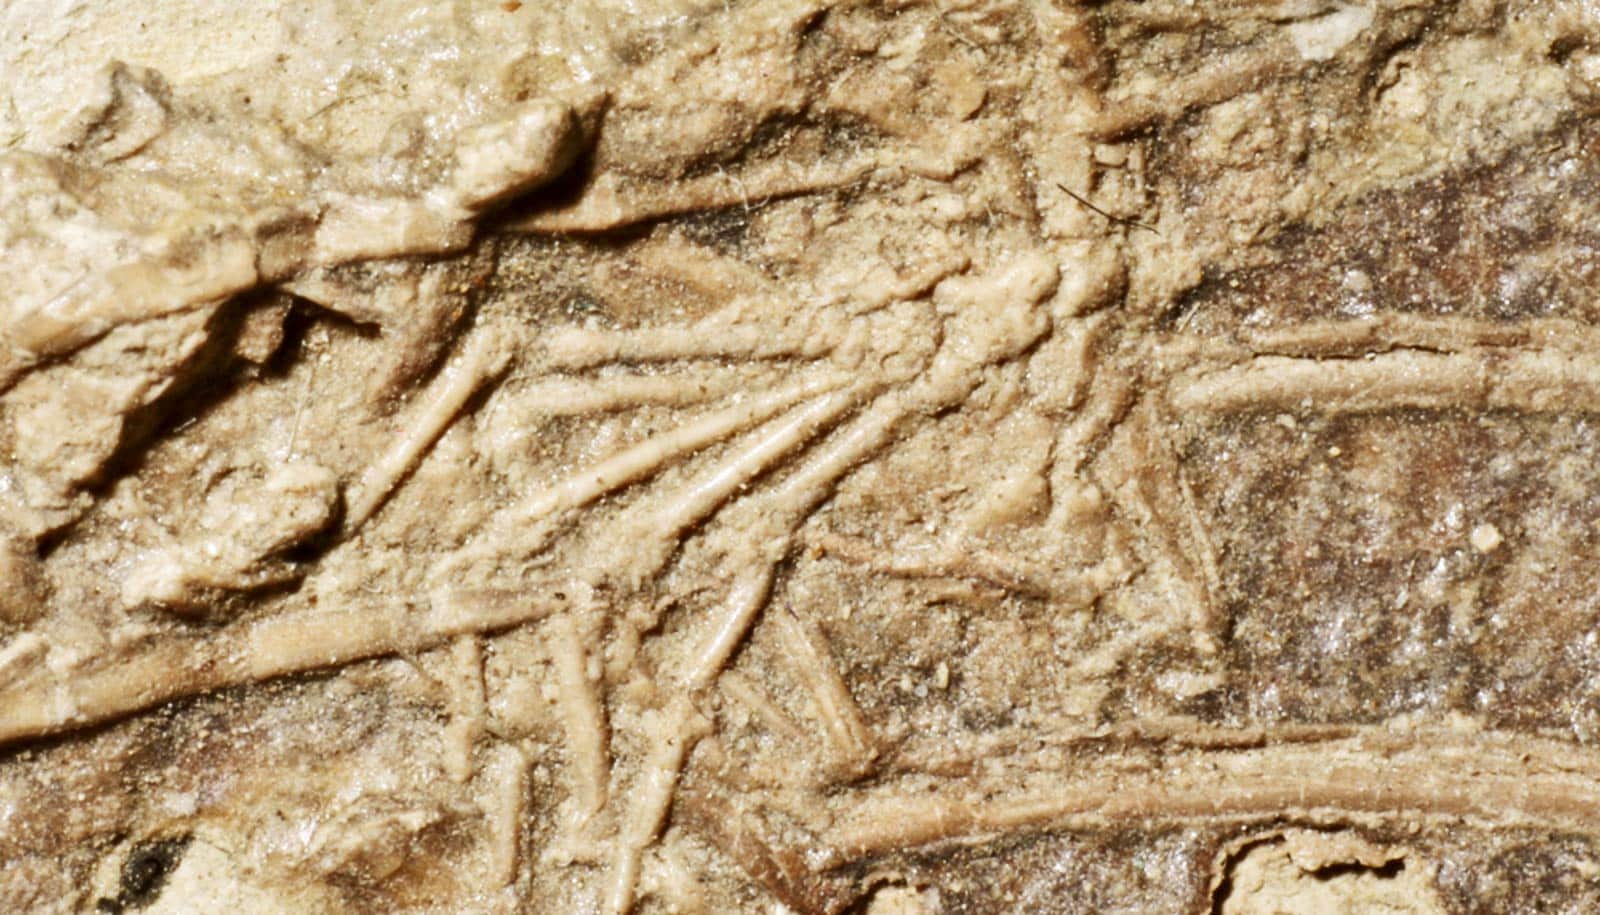 A mammals foot bones seen within fossilized ribs.